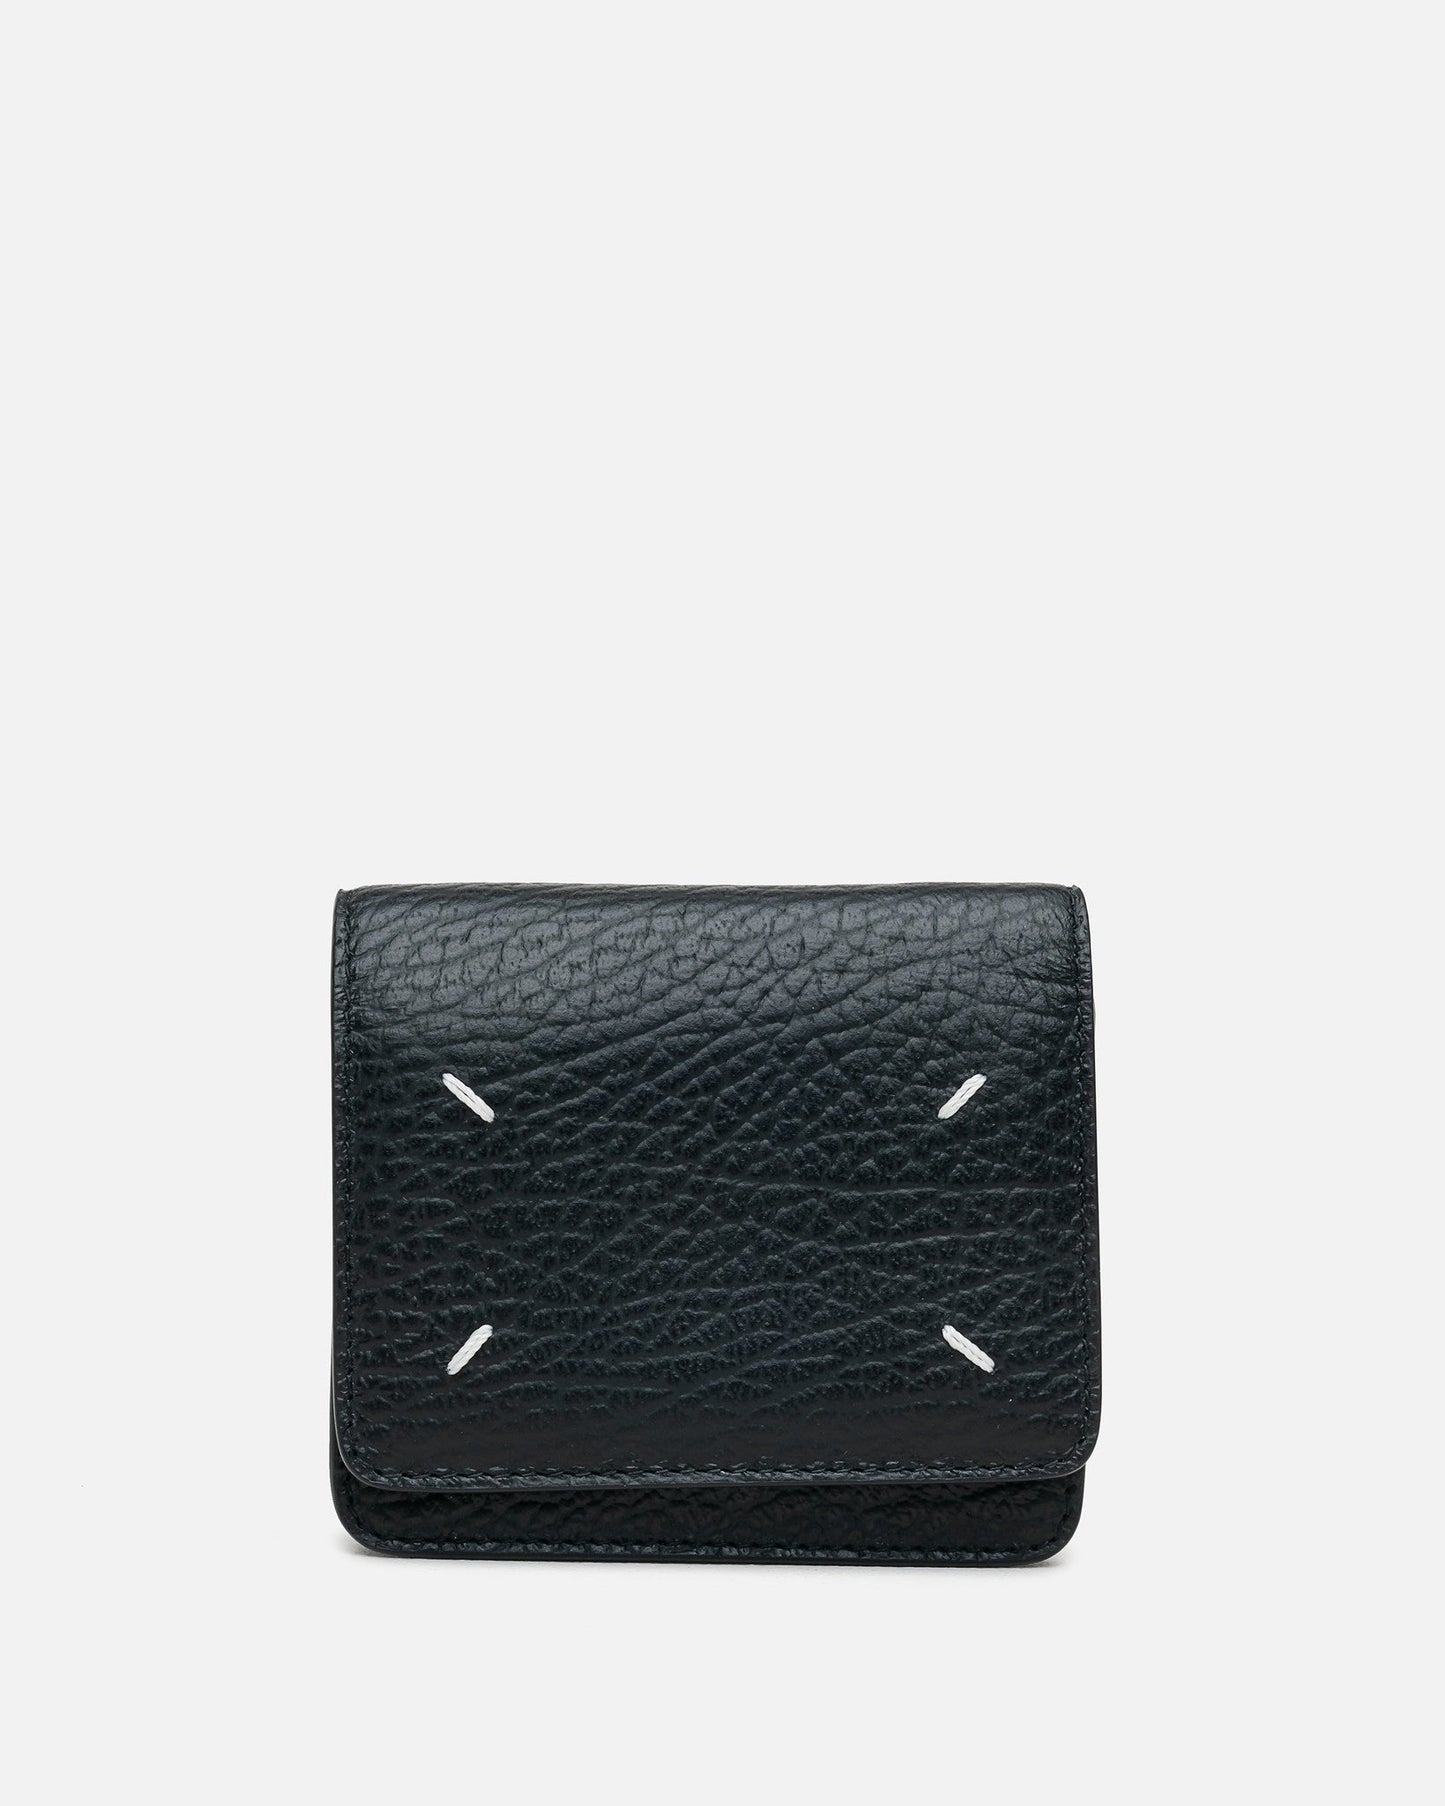 Maison Margiela Leather Goods Small Chain Wallet in Black